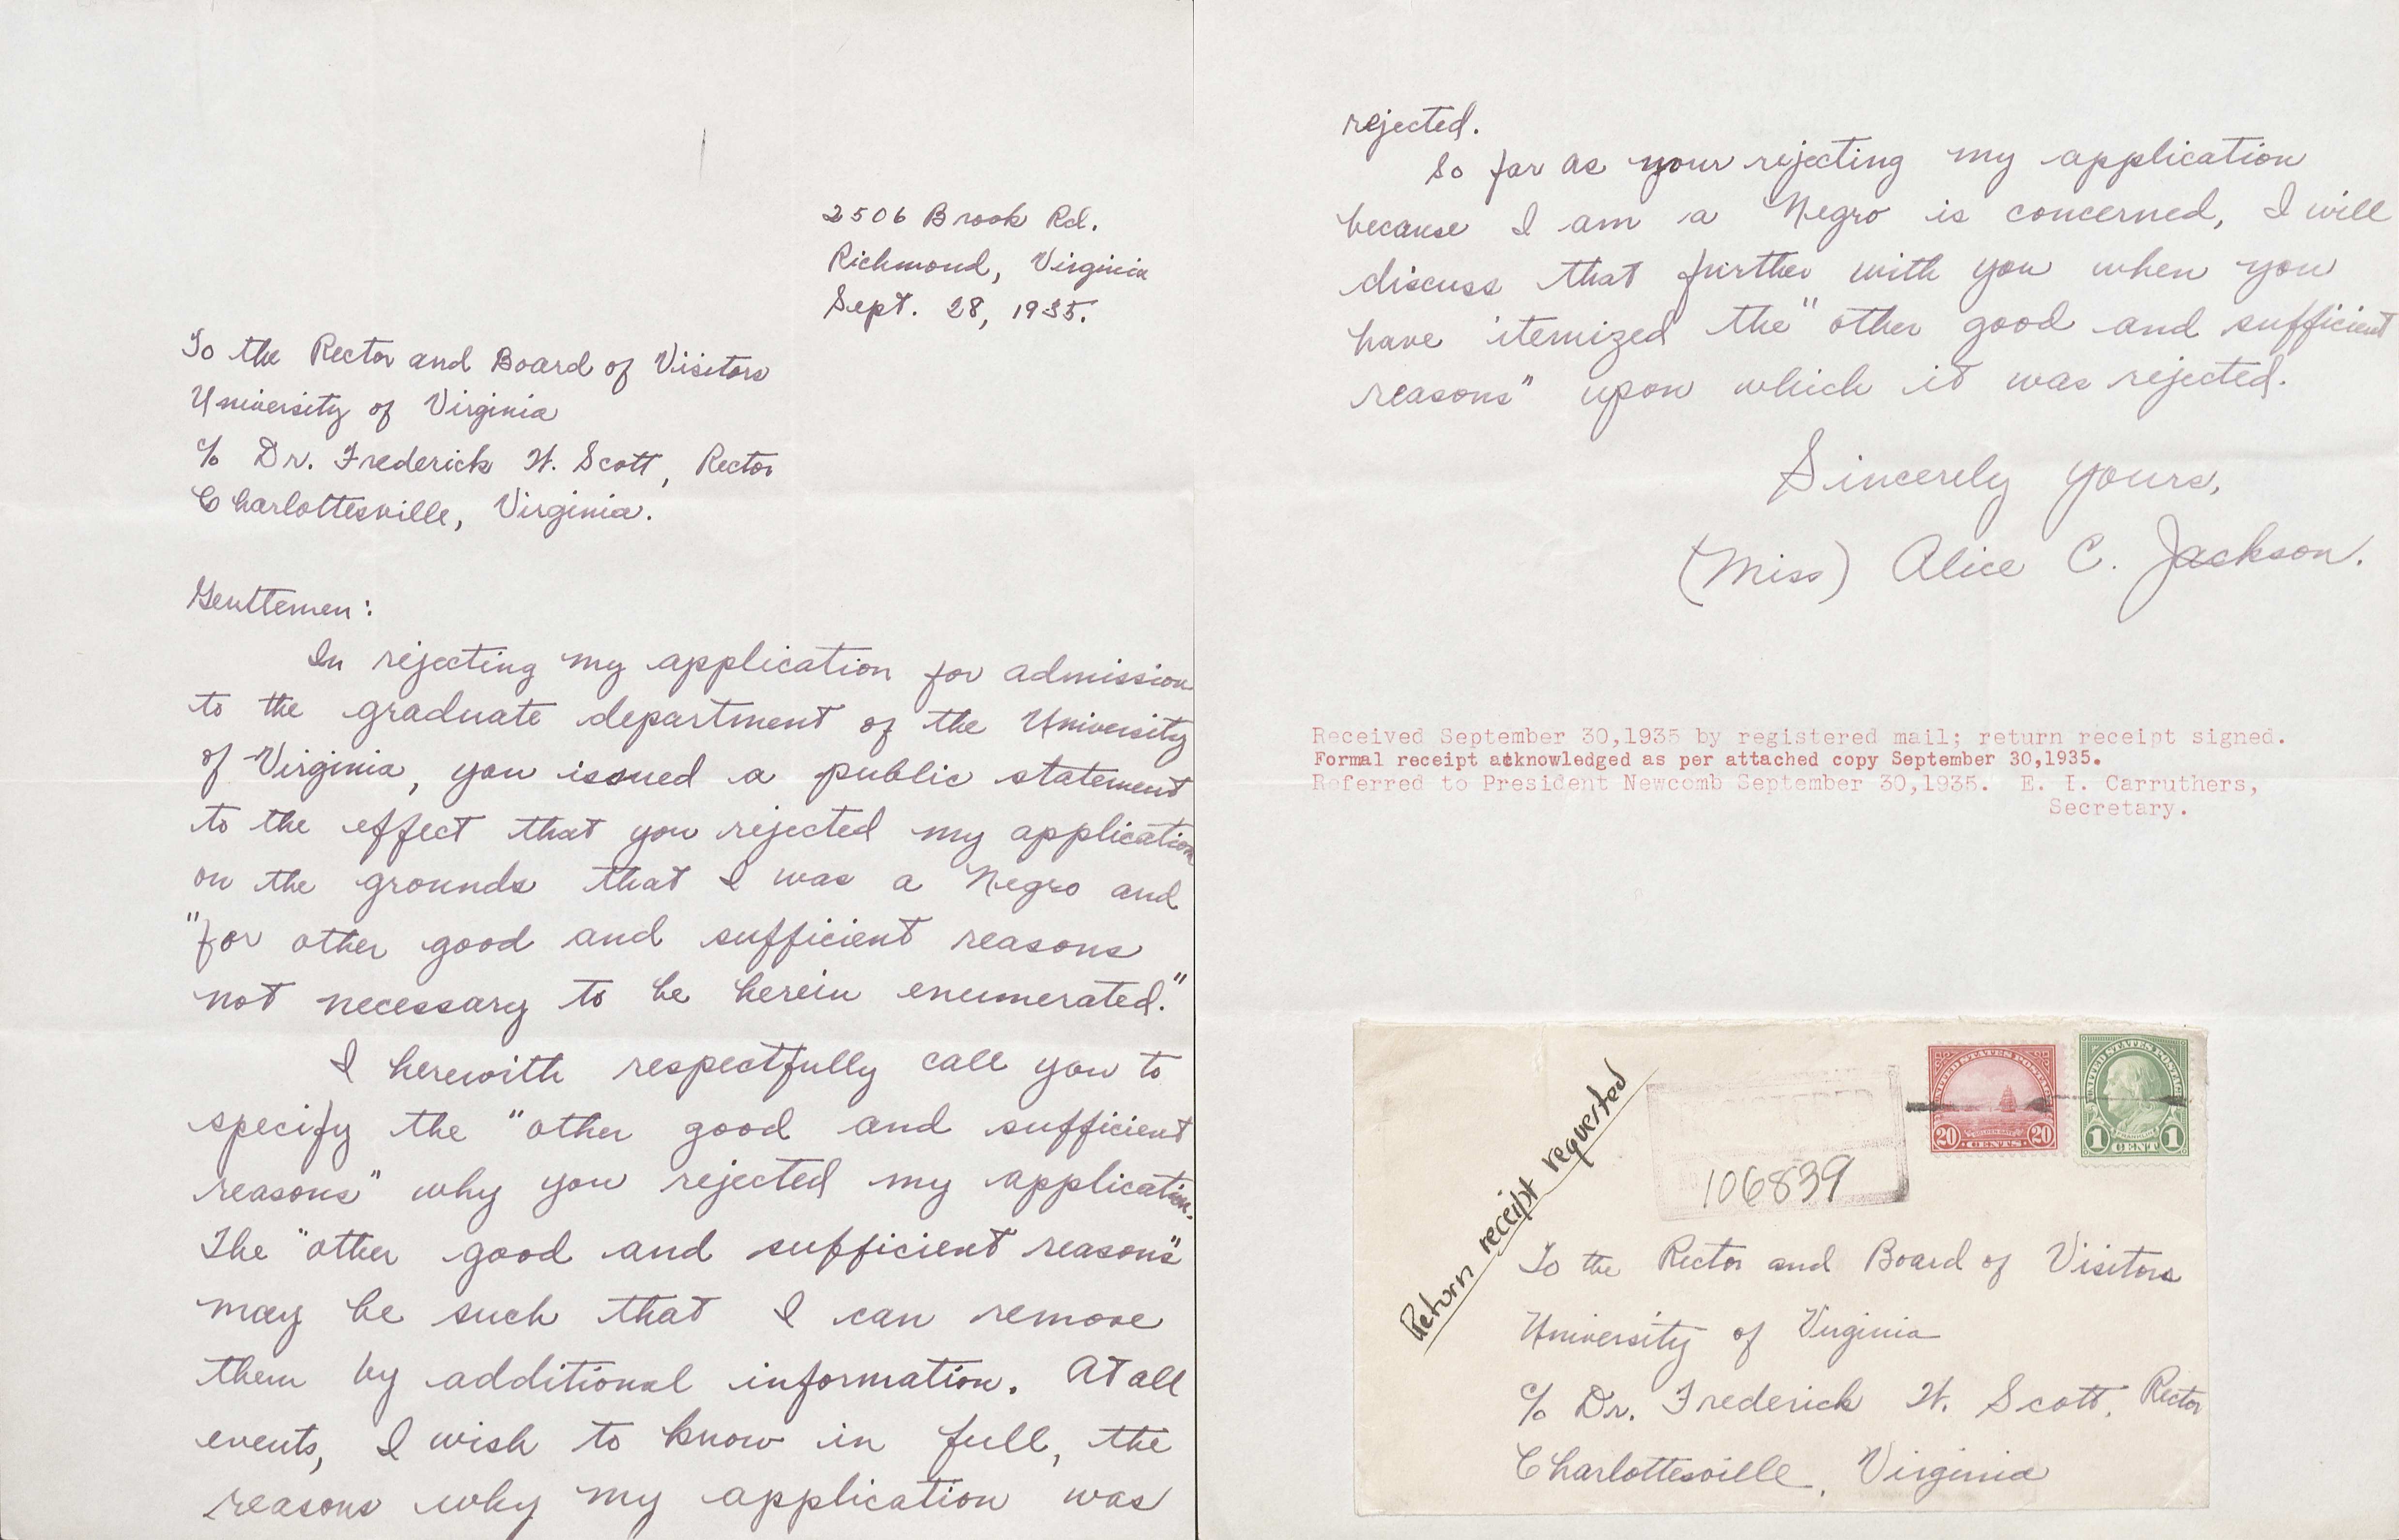 Alice C. Jackson Letter to Frederick W. Scott, 28 September 1935. (RG-2/1/2.491) University of Virginia, Office of the President This is a handwritten letter from Alice C. Jackson to Dr. Frederick W. Scott, the Rector and Board of Visitors at the University of Virginia.  Ms. Jackson was the first African American to apply to the University and was seeking a master’s degree in French.  In her spirited letter, Ms. Jackson writes an appeal to the University in search of a full explanation as to why her application was rejected.  